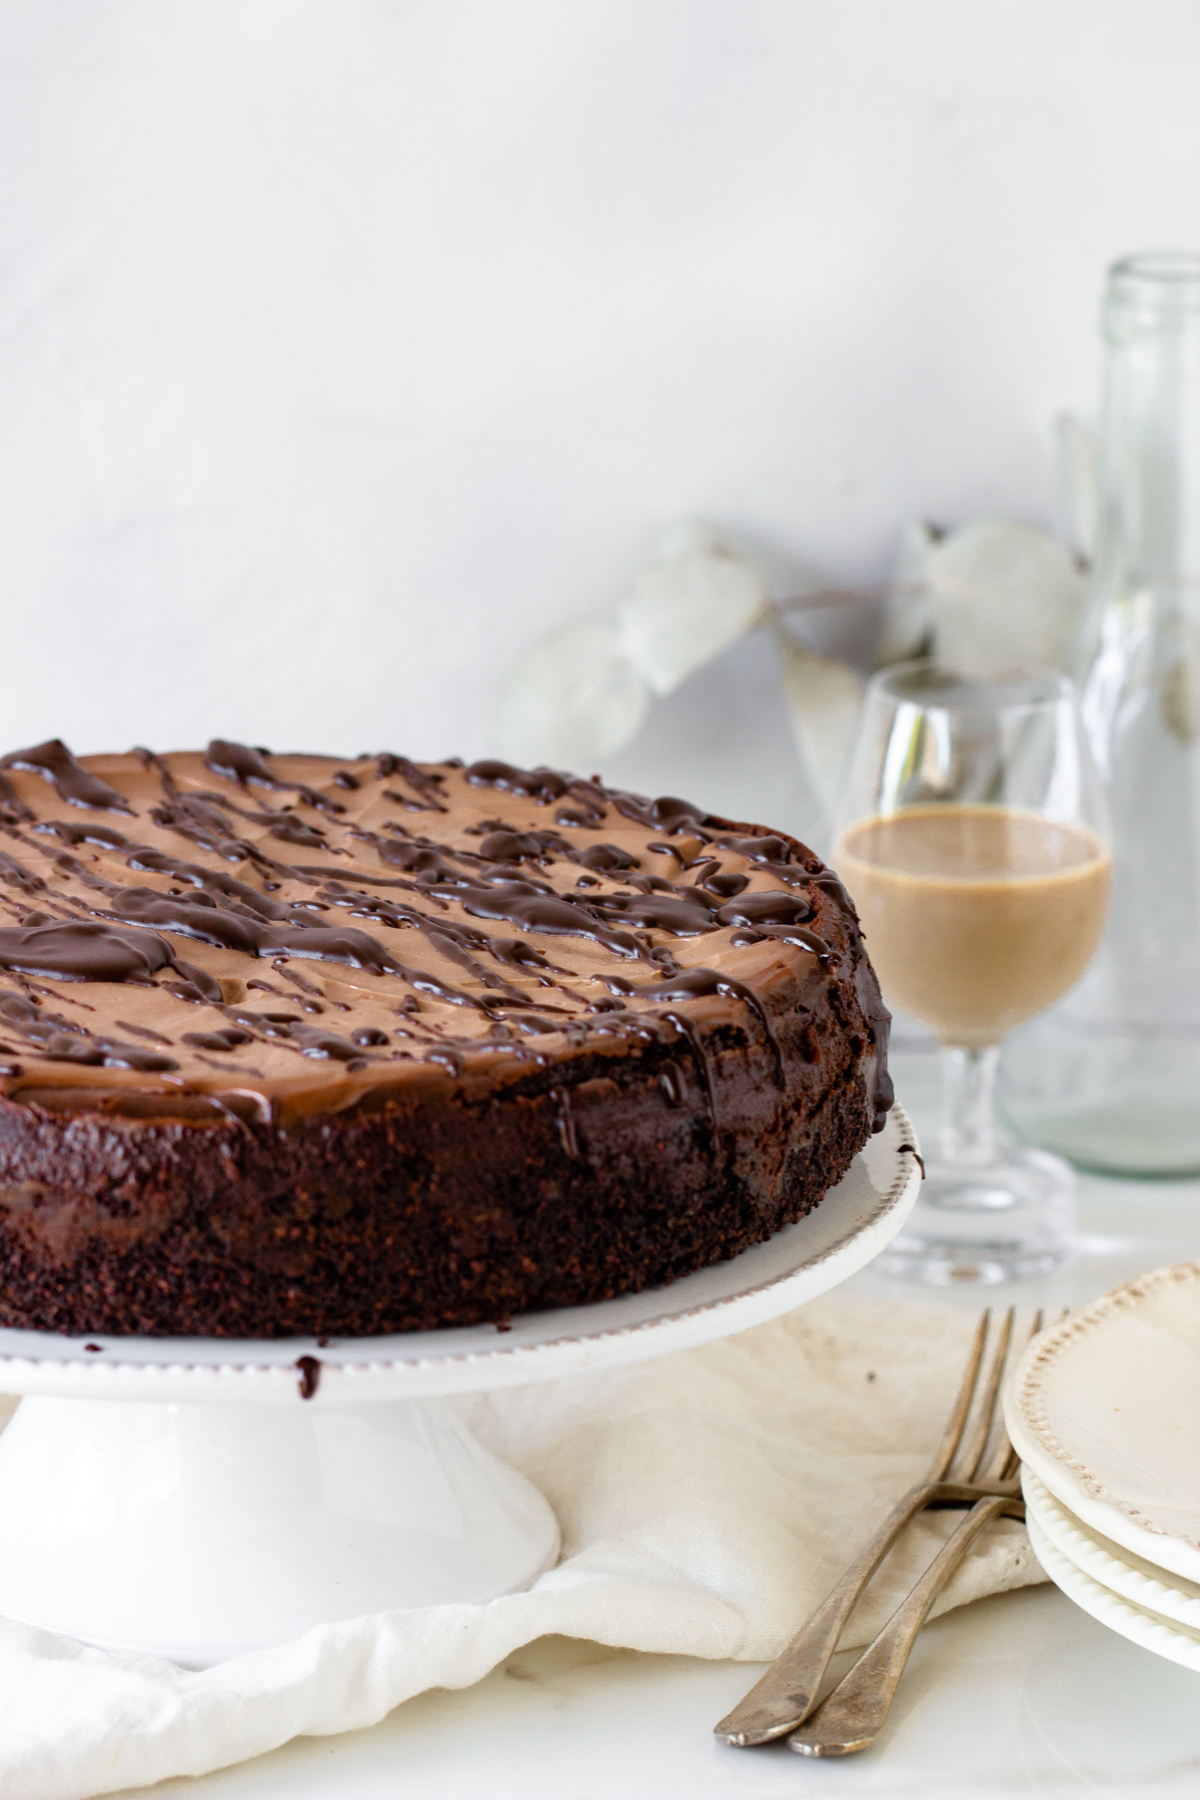 Whole chocolate cheesecake on white cake stand, glass with baileys, forks, piece of cloth